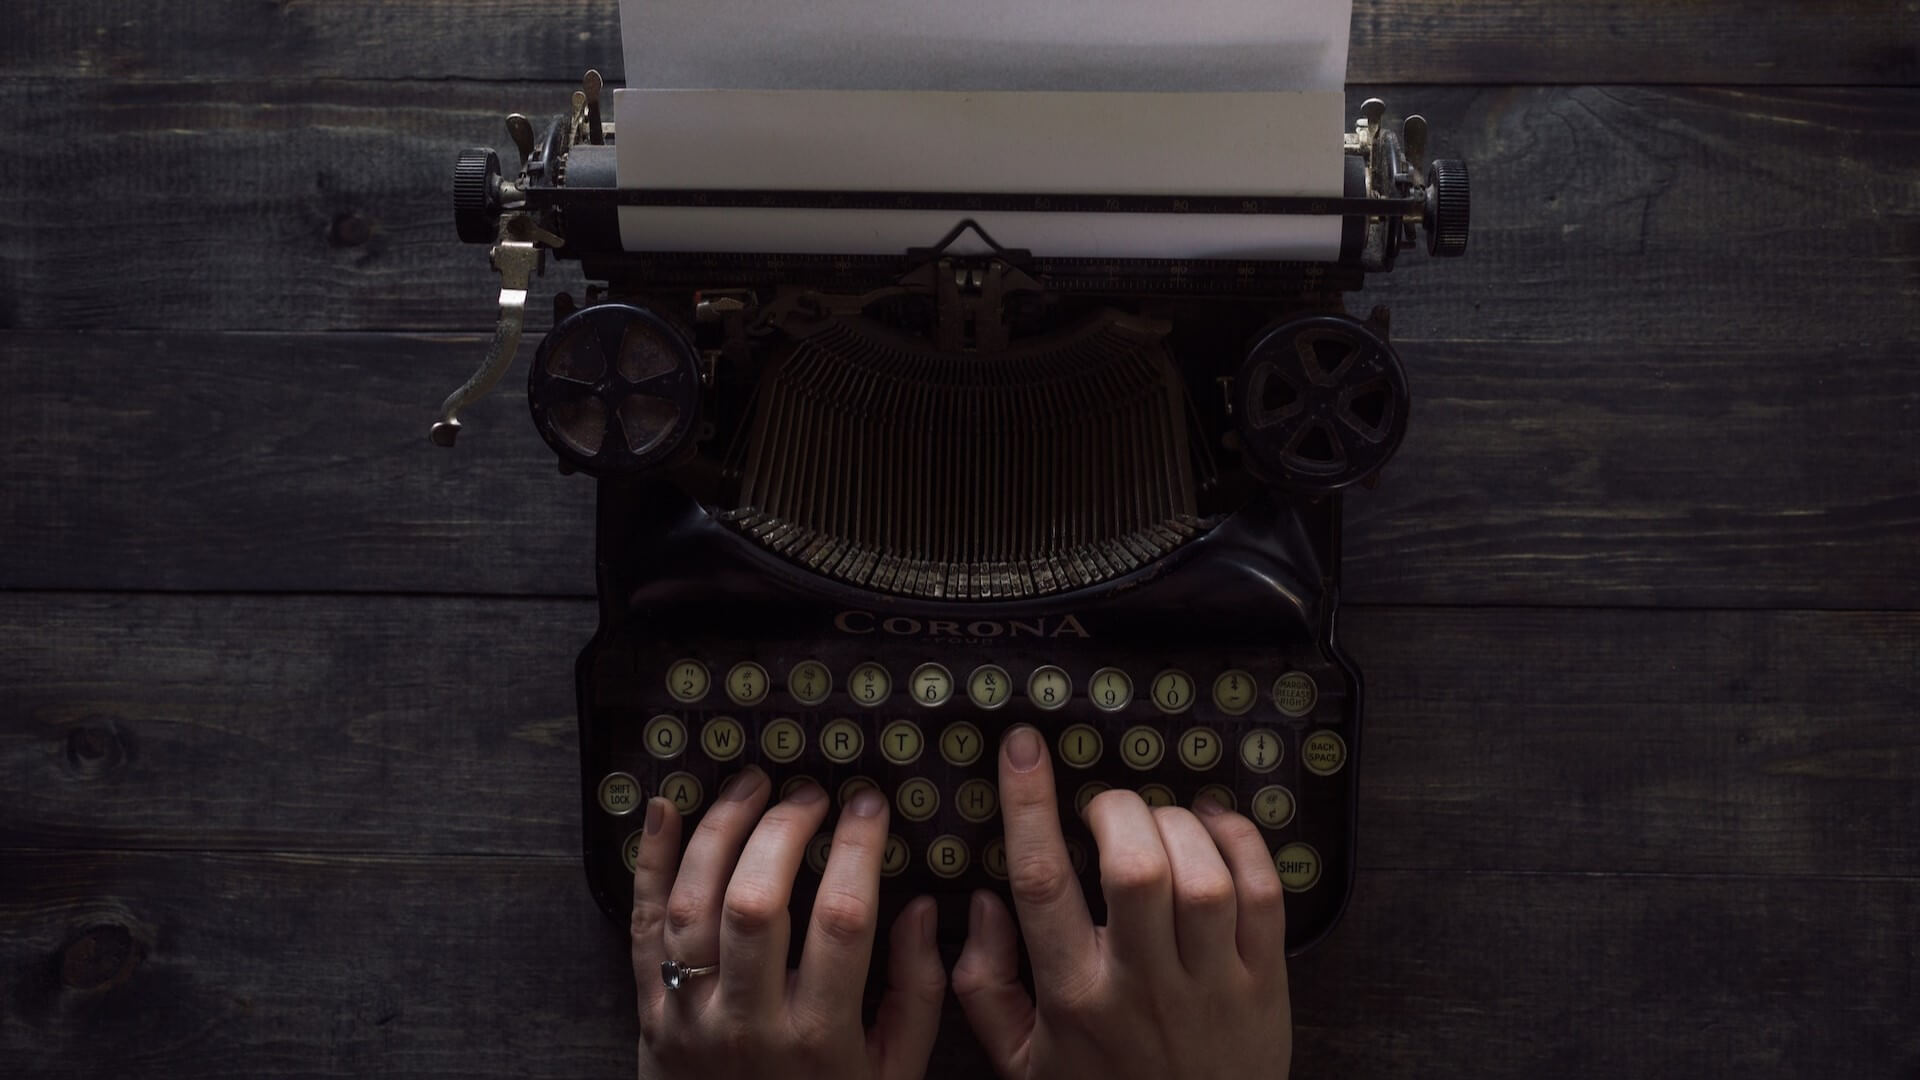 A person who uses a typewriter to write a book